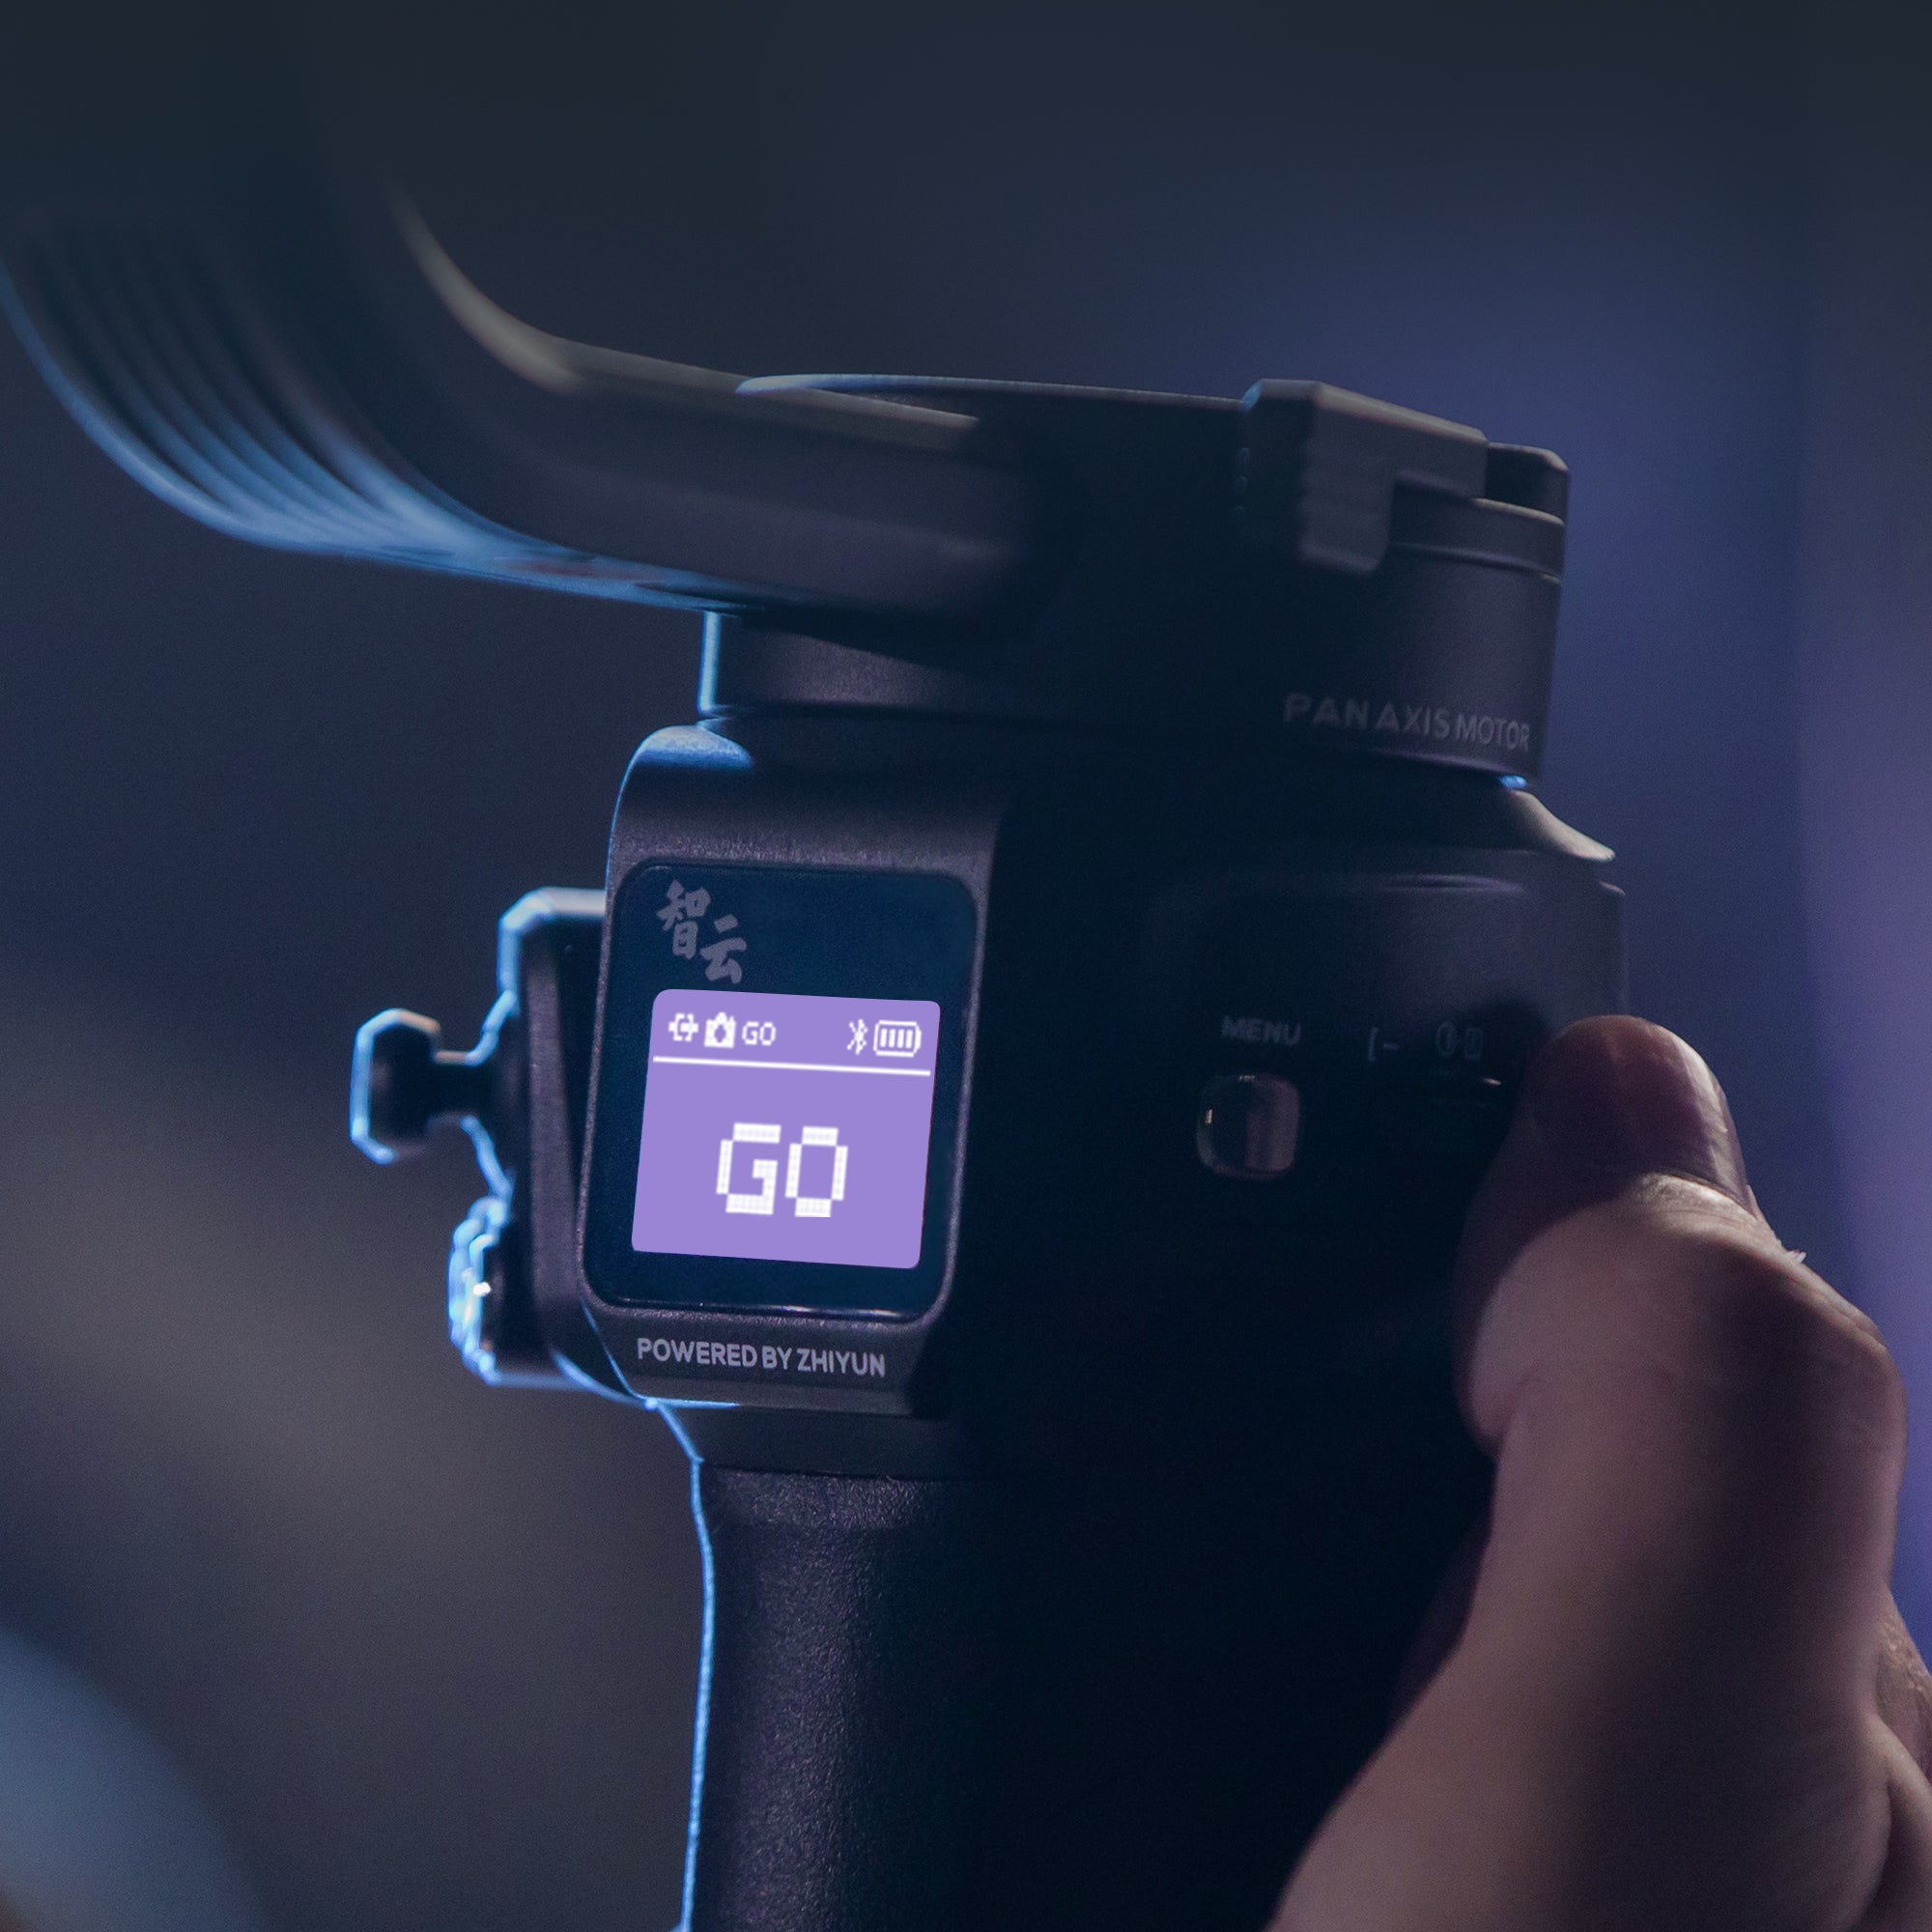 The OLED Chinese & English screen visualizes all gimbal & camera statuses and allows you to achieve advanced features like the timelapse and customized V mode seamlessly.